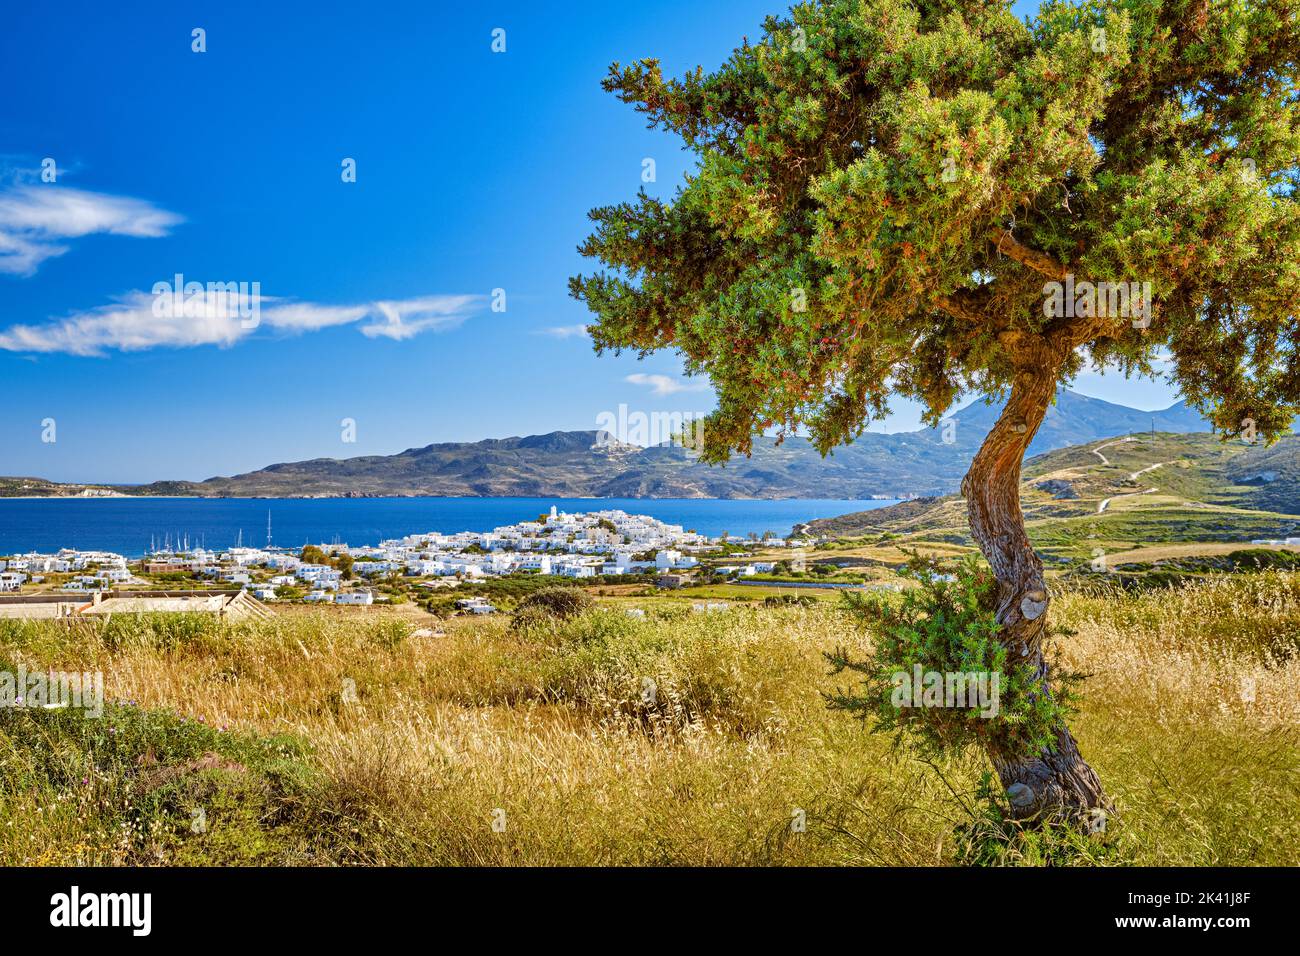 Beautiful view of whitewashed Greek town by sea bay on sunny day with pine tree in foreground. Adamantas, main town of Milos island, Greece Stock Photo